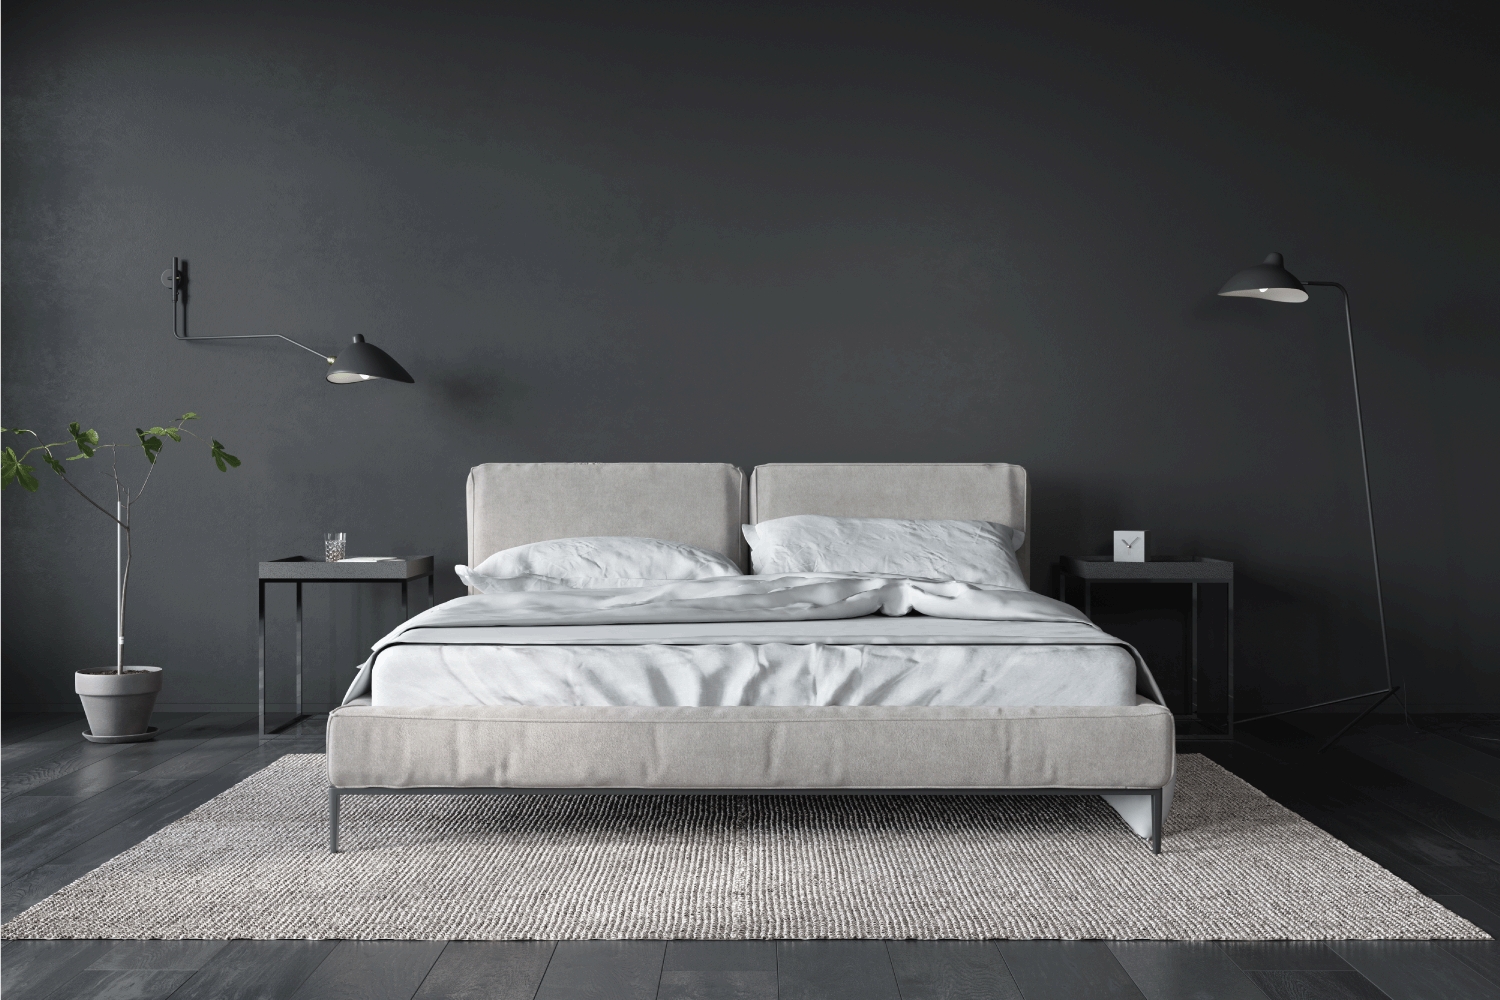 Bedroom interior with white bed on a dark gray wall, light sconce on the sides of the bed